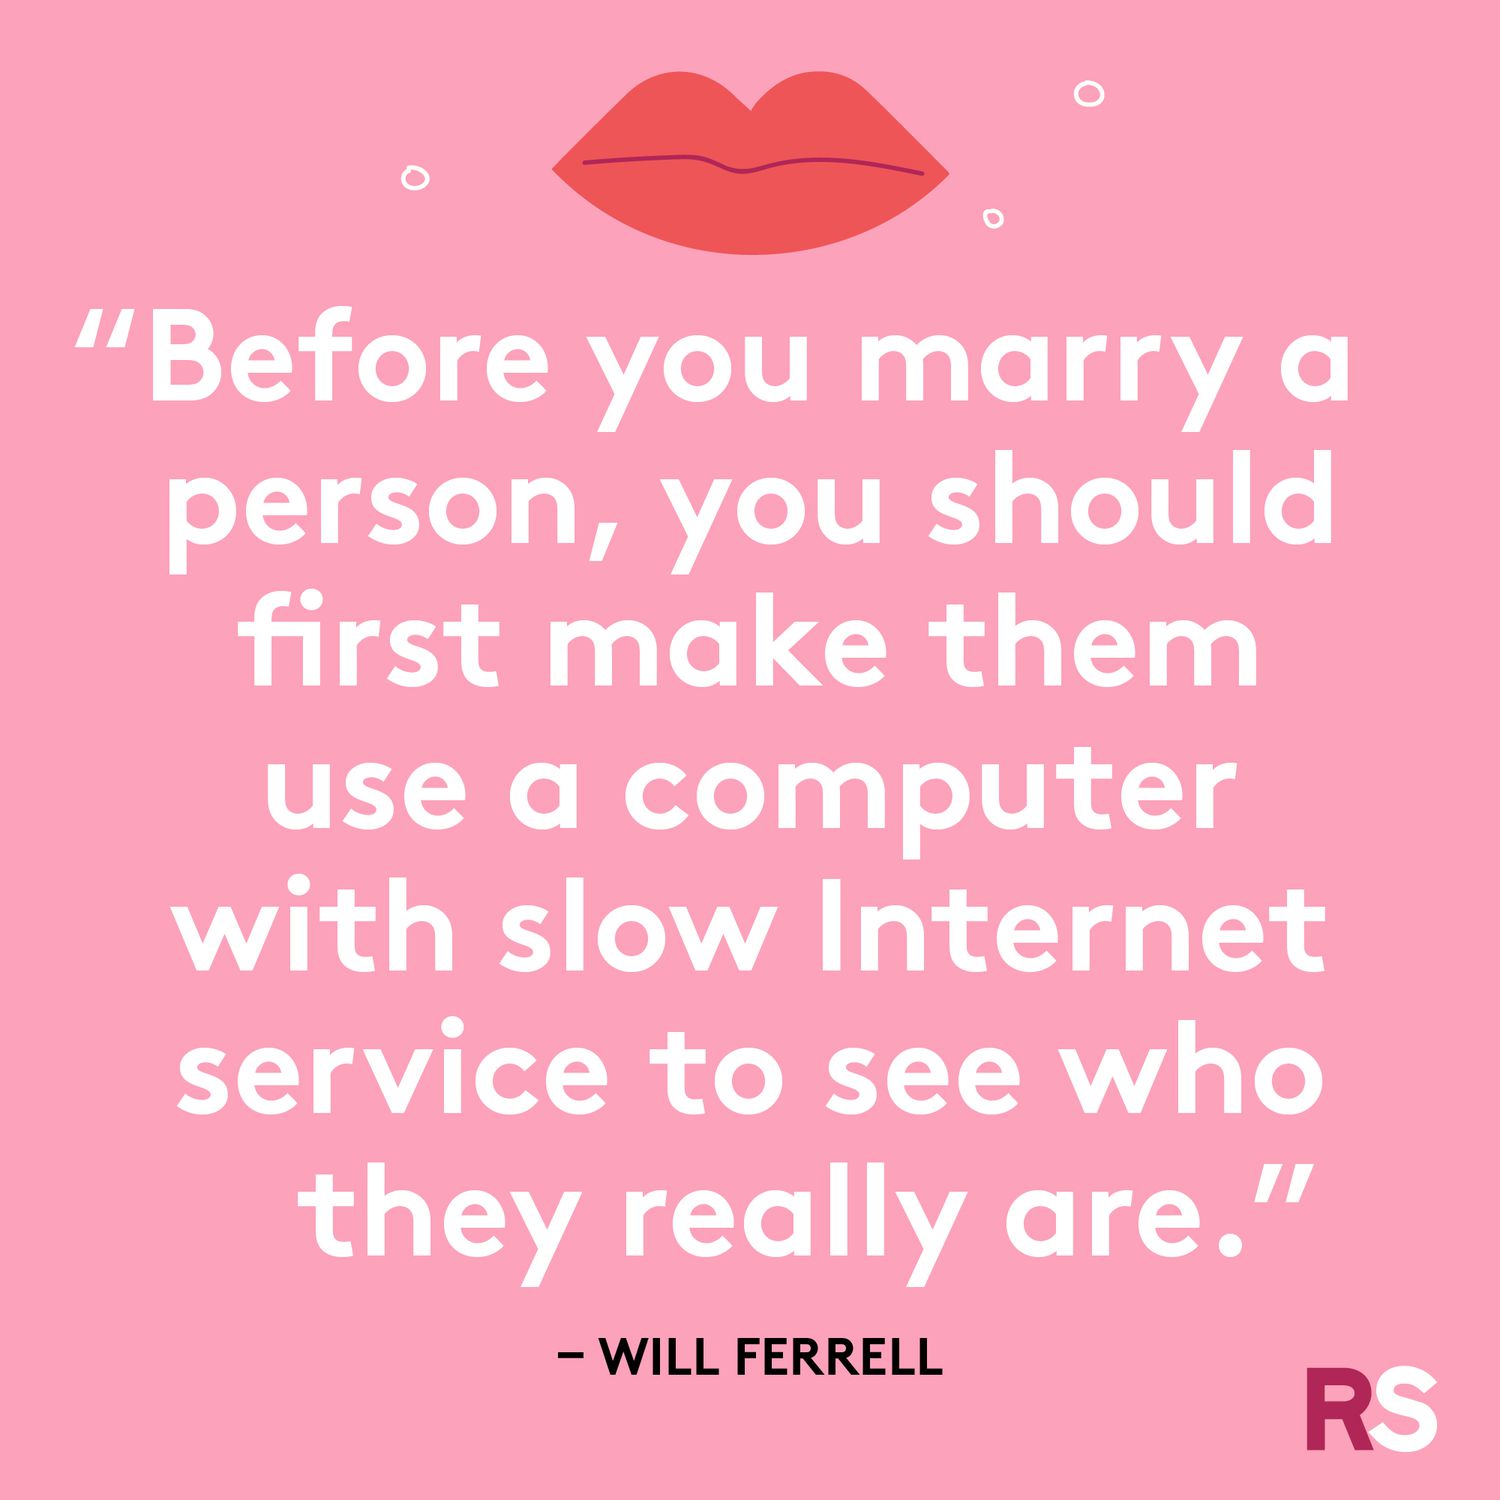 Before you marry a person, make them use a computer with slow internet service to see who they really are.